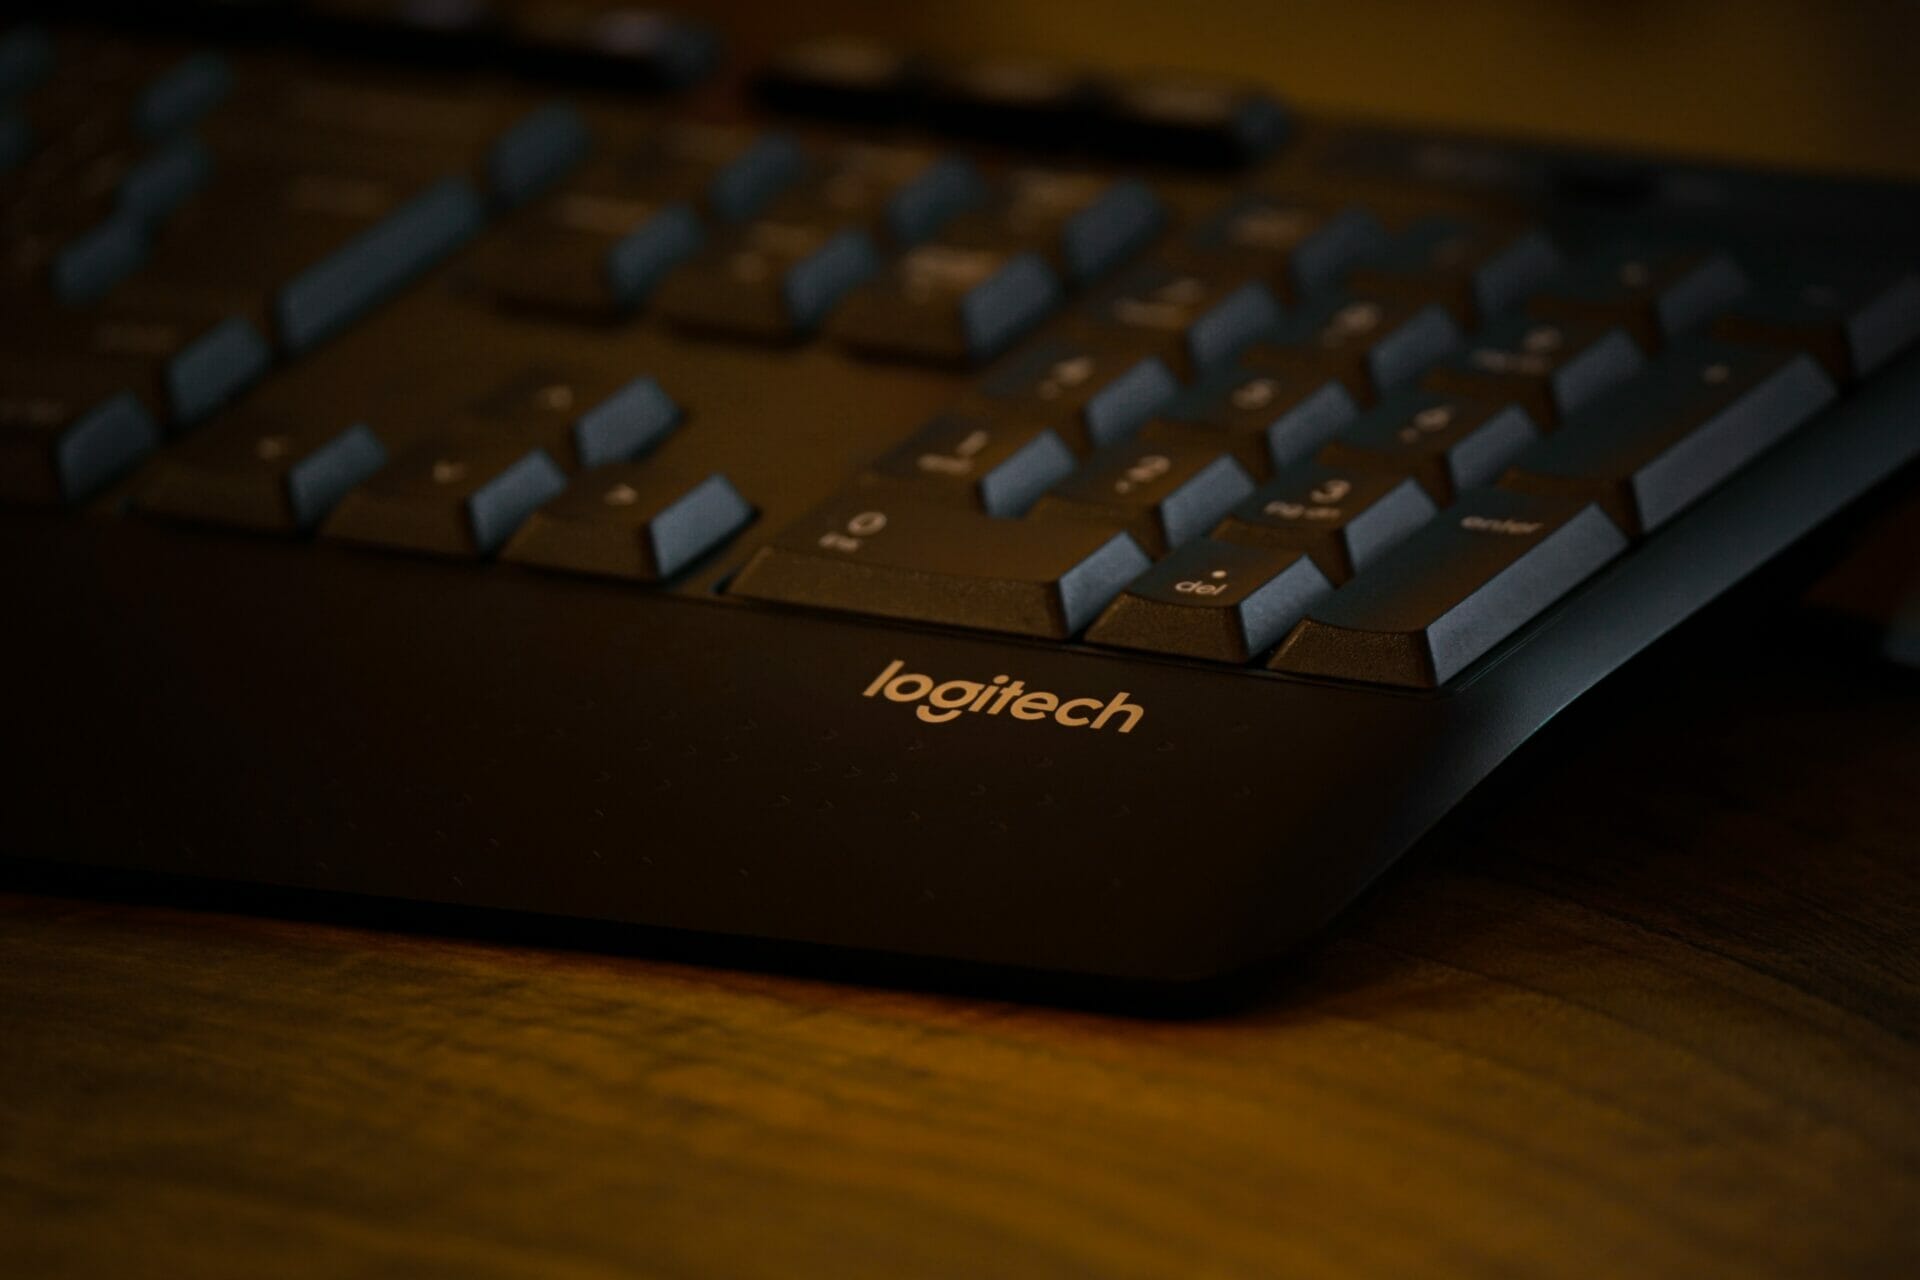 How to Clean a Logitech Keyboard